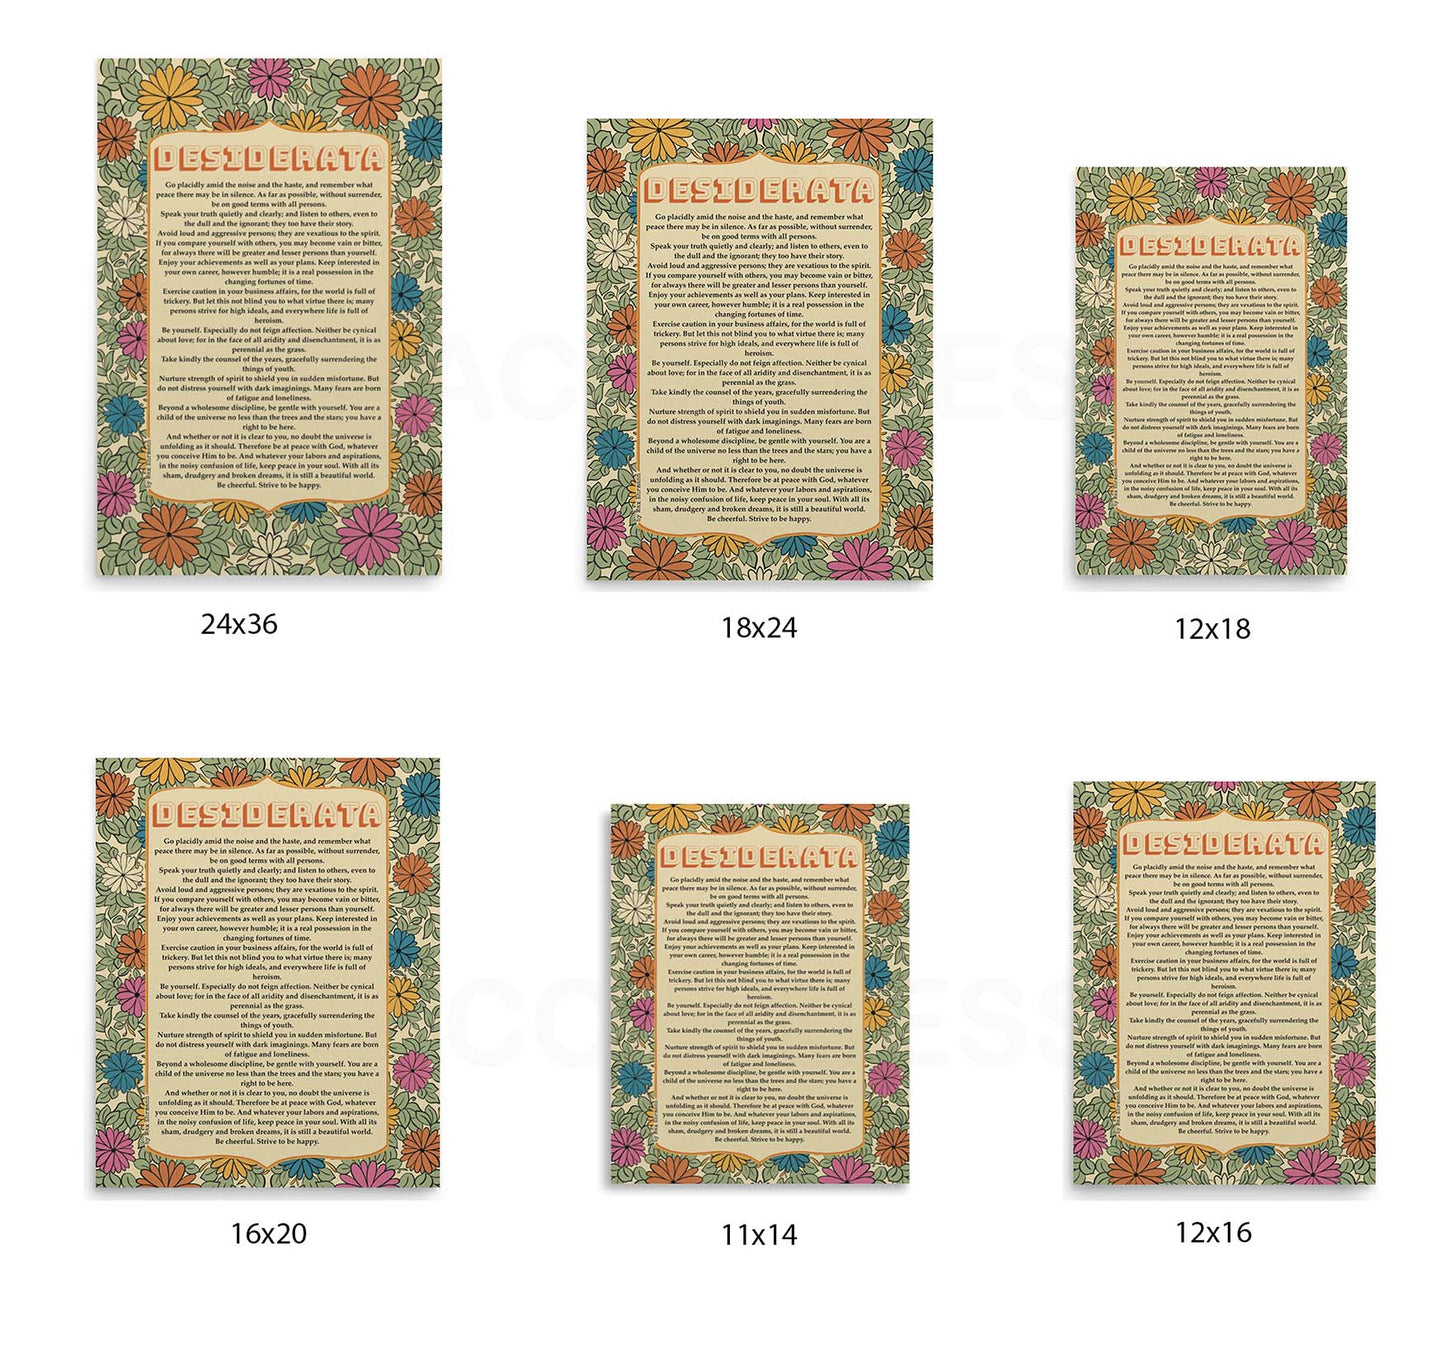 Desiderata Poem Poster, Inspirational Poetry with Floral Art, Grad Gift Print - A Cozy Mess